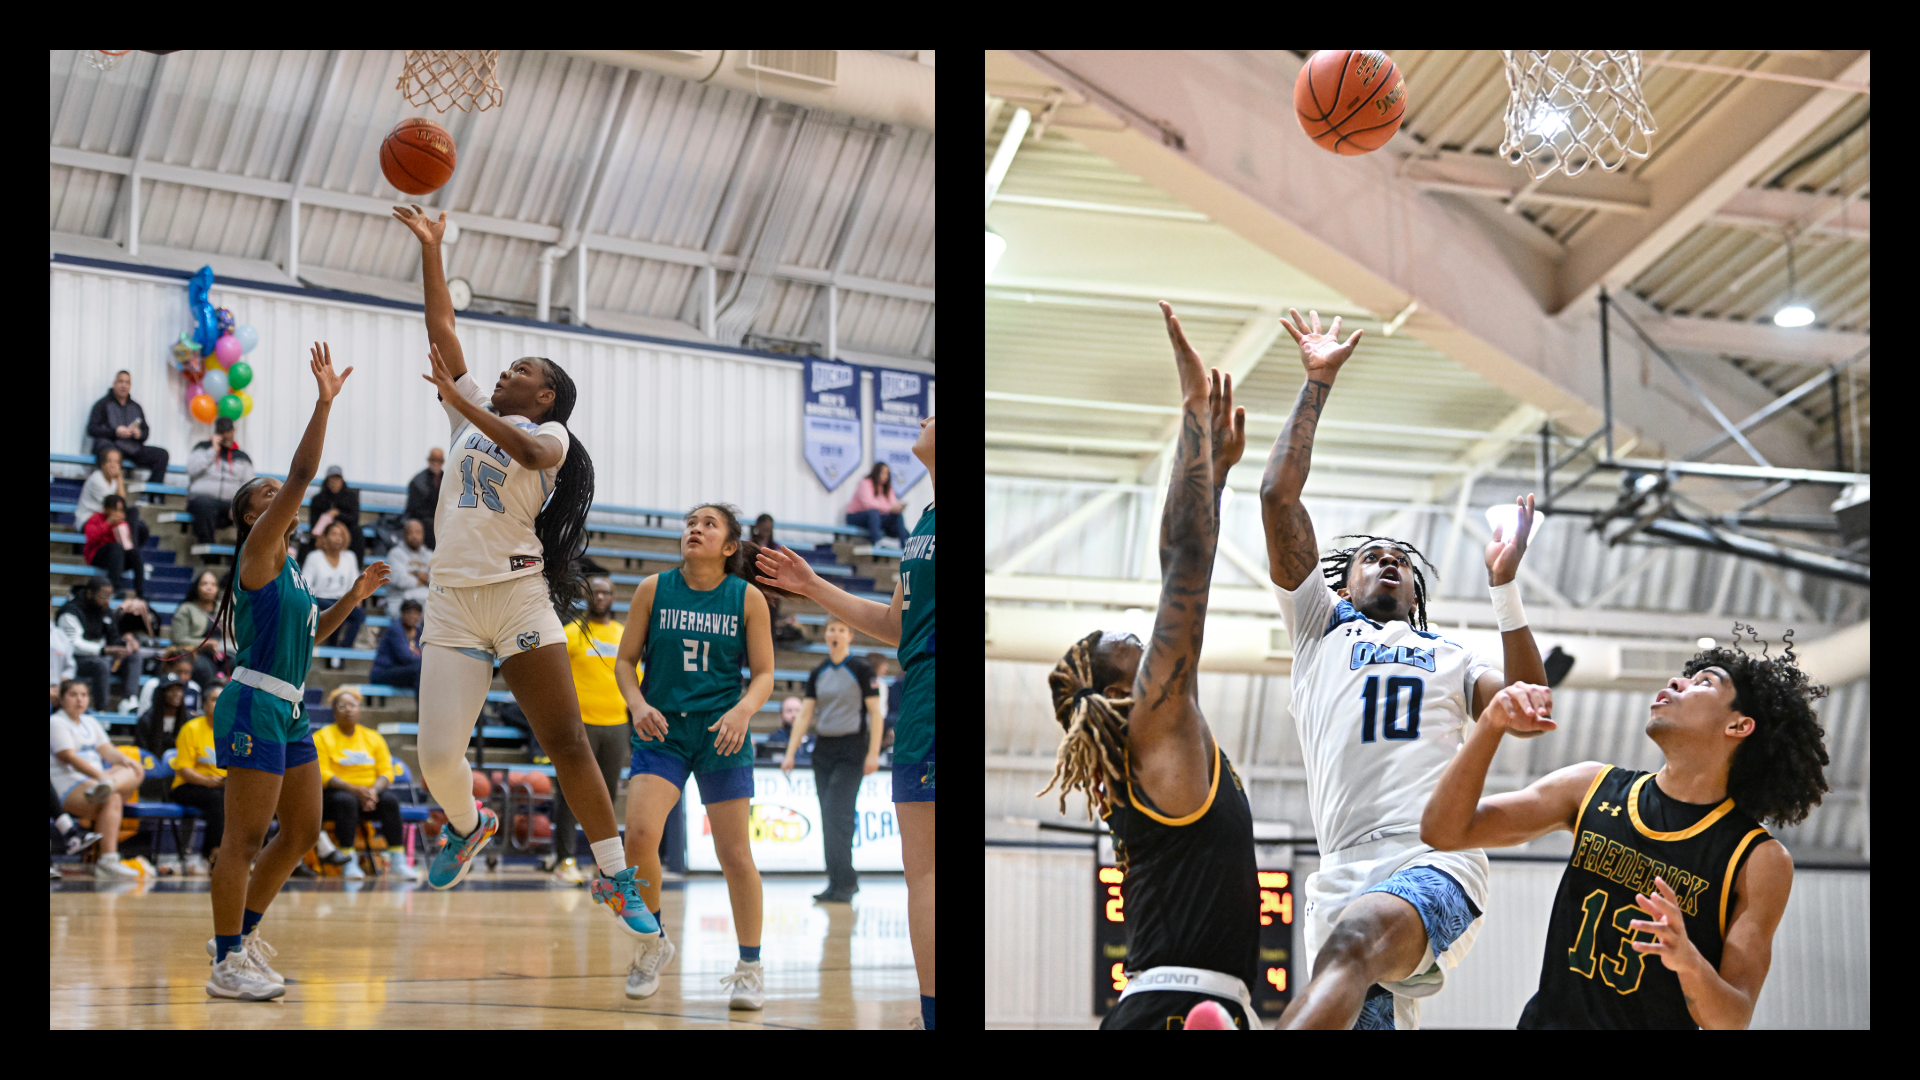 Amari Jones, Justin Minor Named Region 20 DIII Players of the Month for January